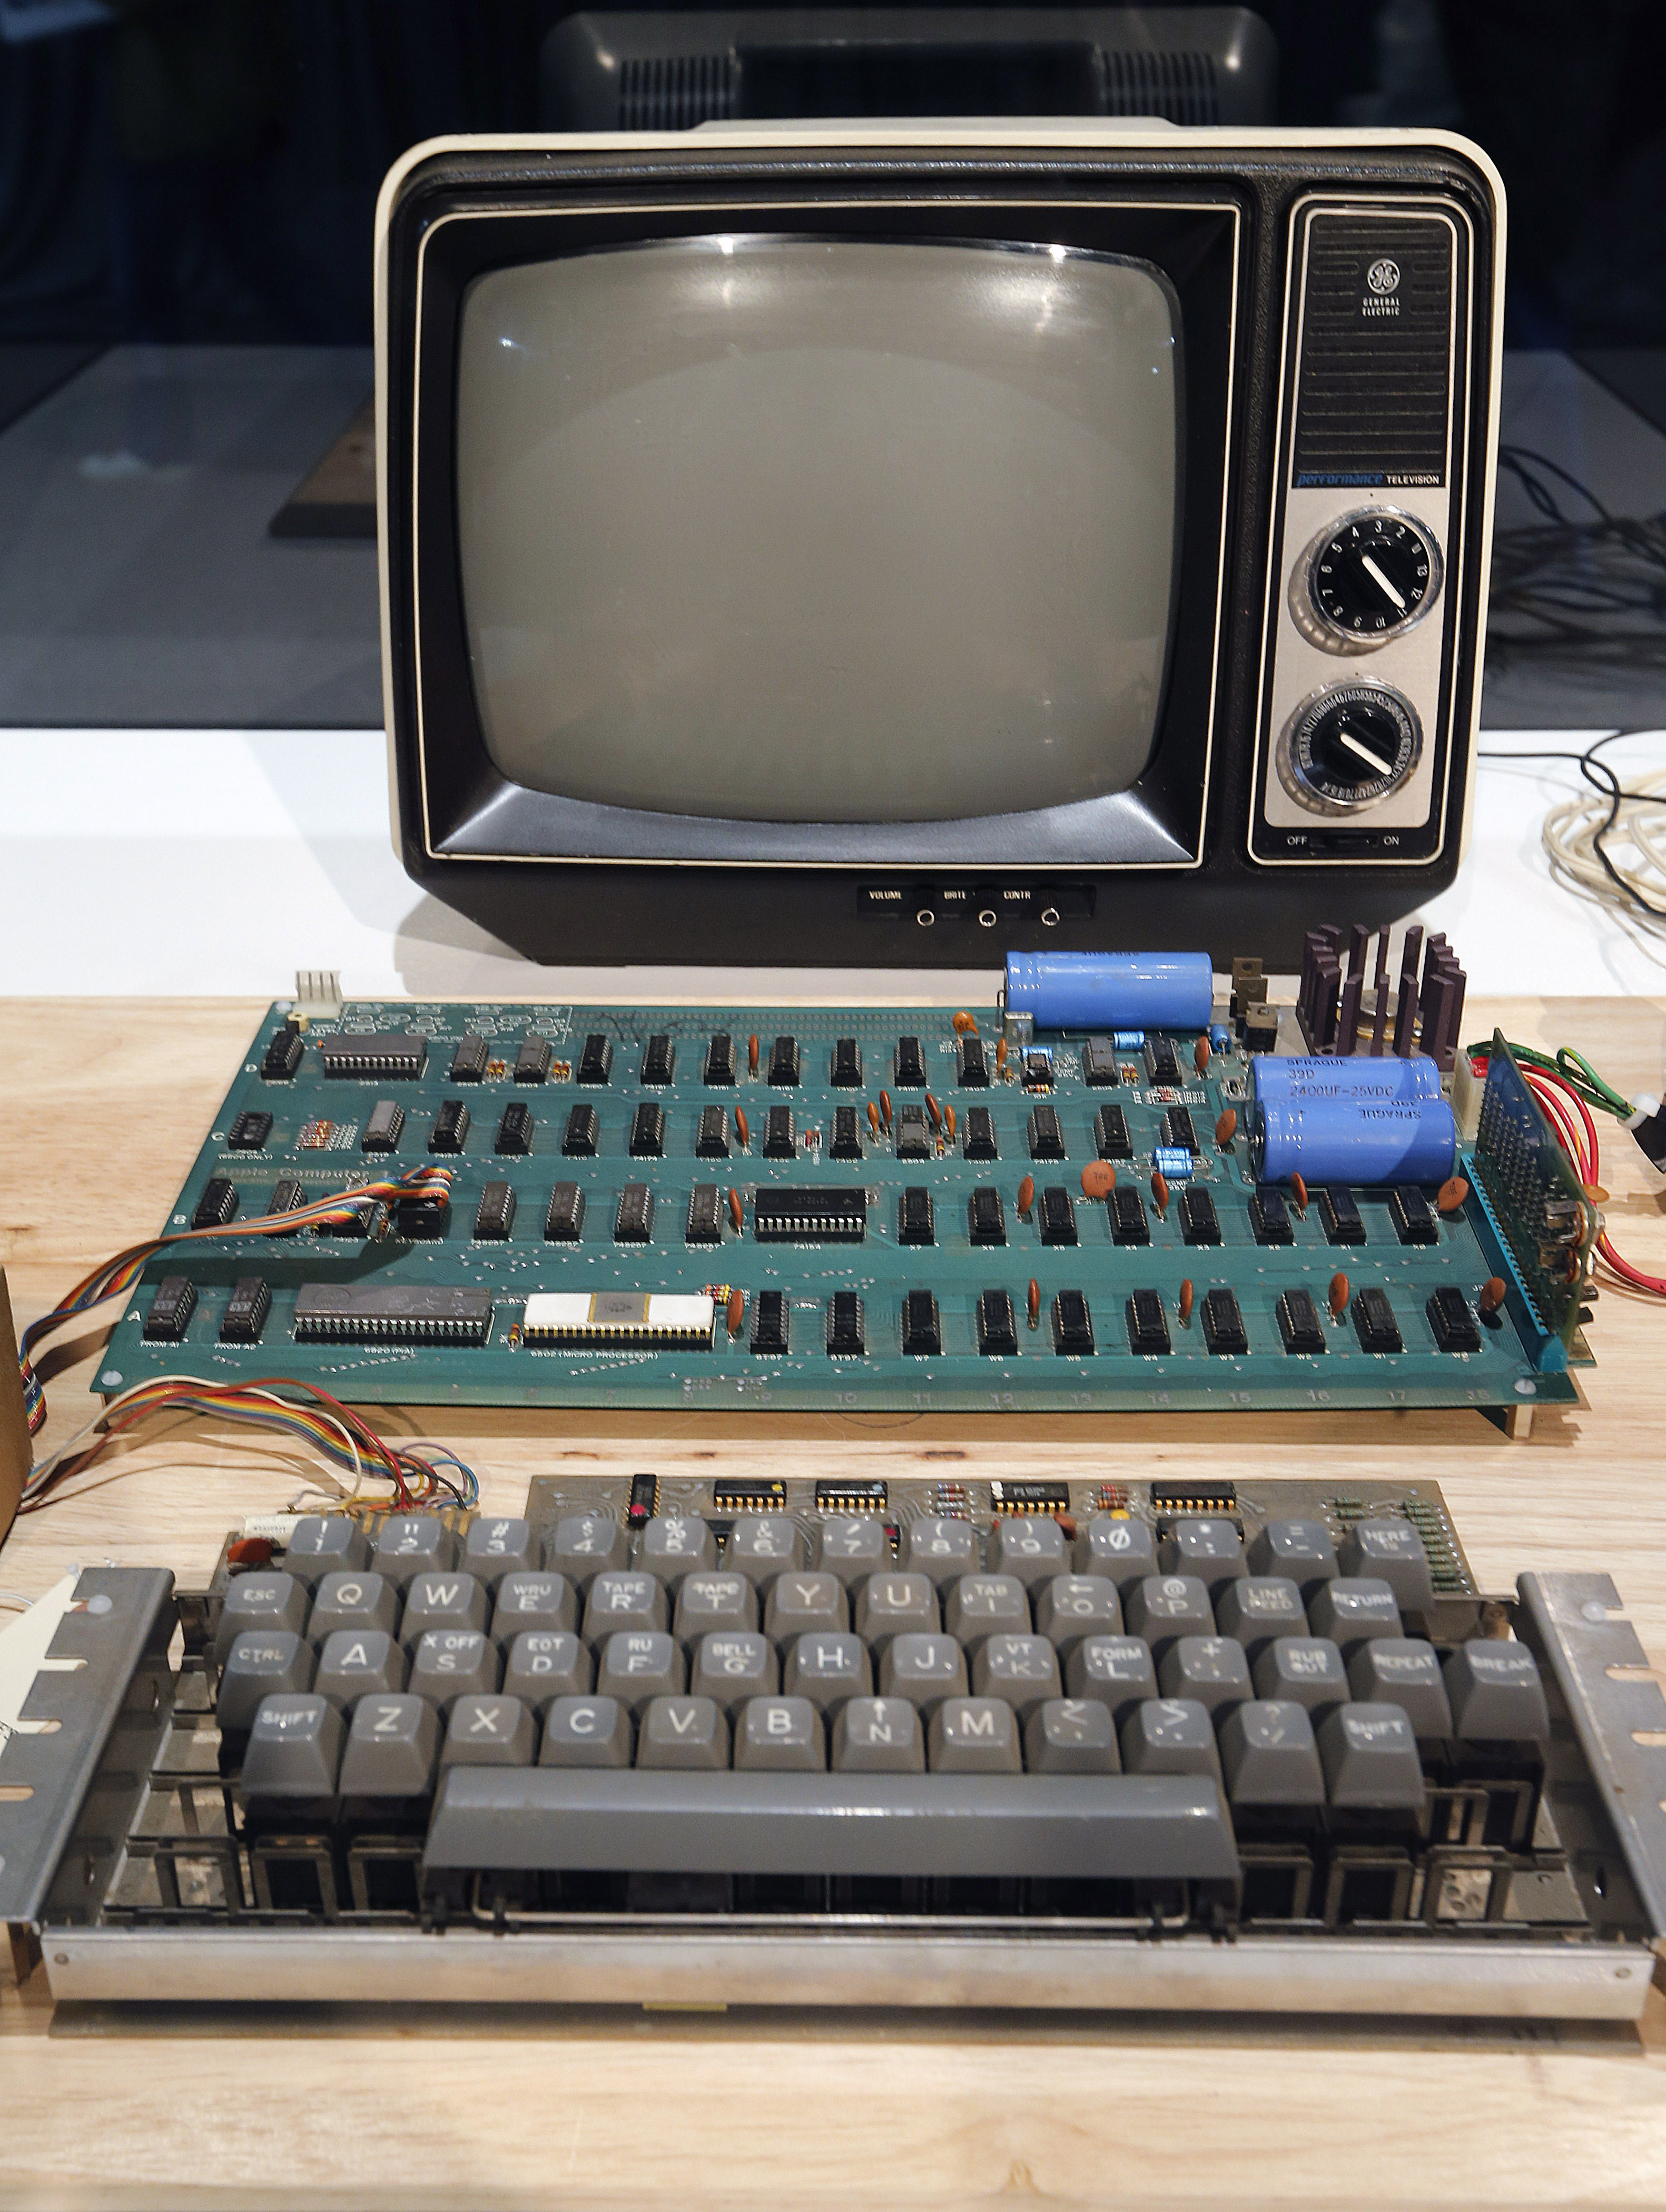 An original Apple computer, now known as the Apple-1, which was designed and hand-built in 1976 by Apple co-founder Steve Wozniak is shown at a press preview at the Computer History Museum in Mountain View, Calif., on June 24, 2013. (Tony Avelar—EPA)